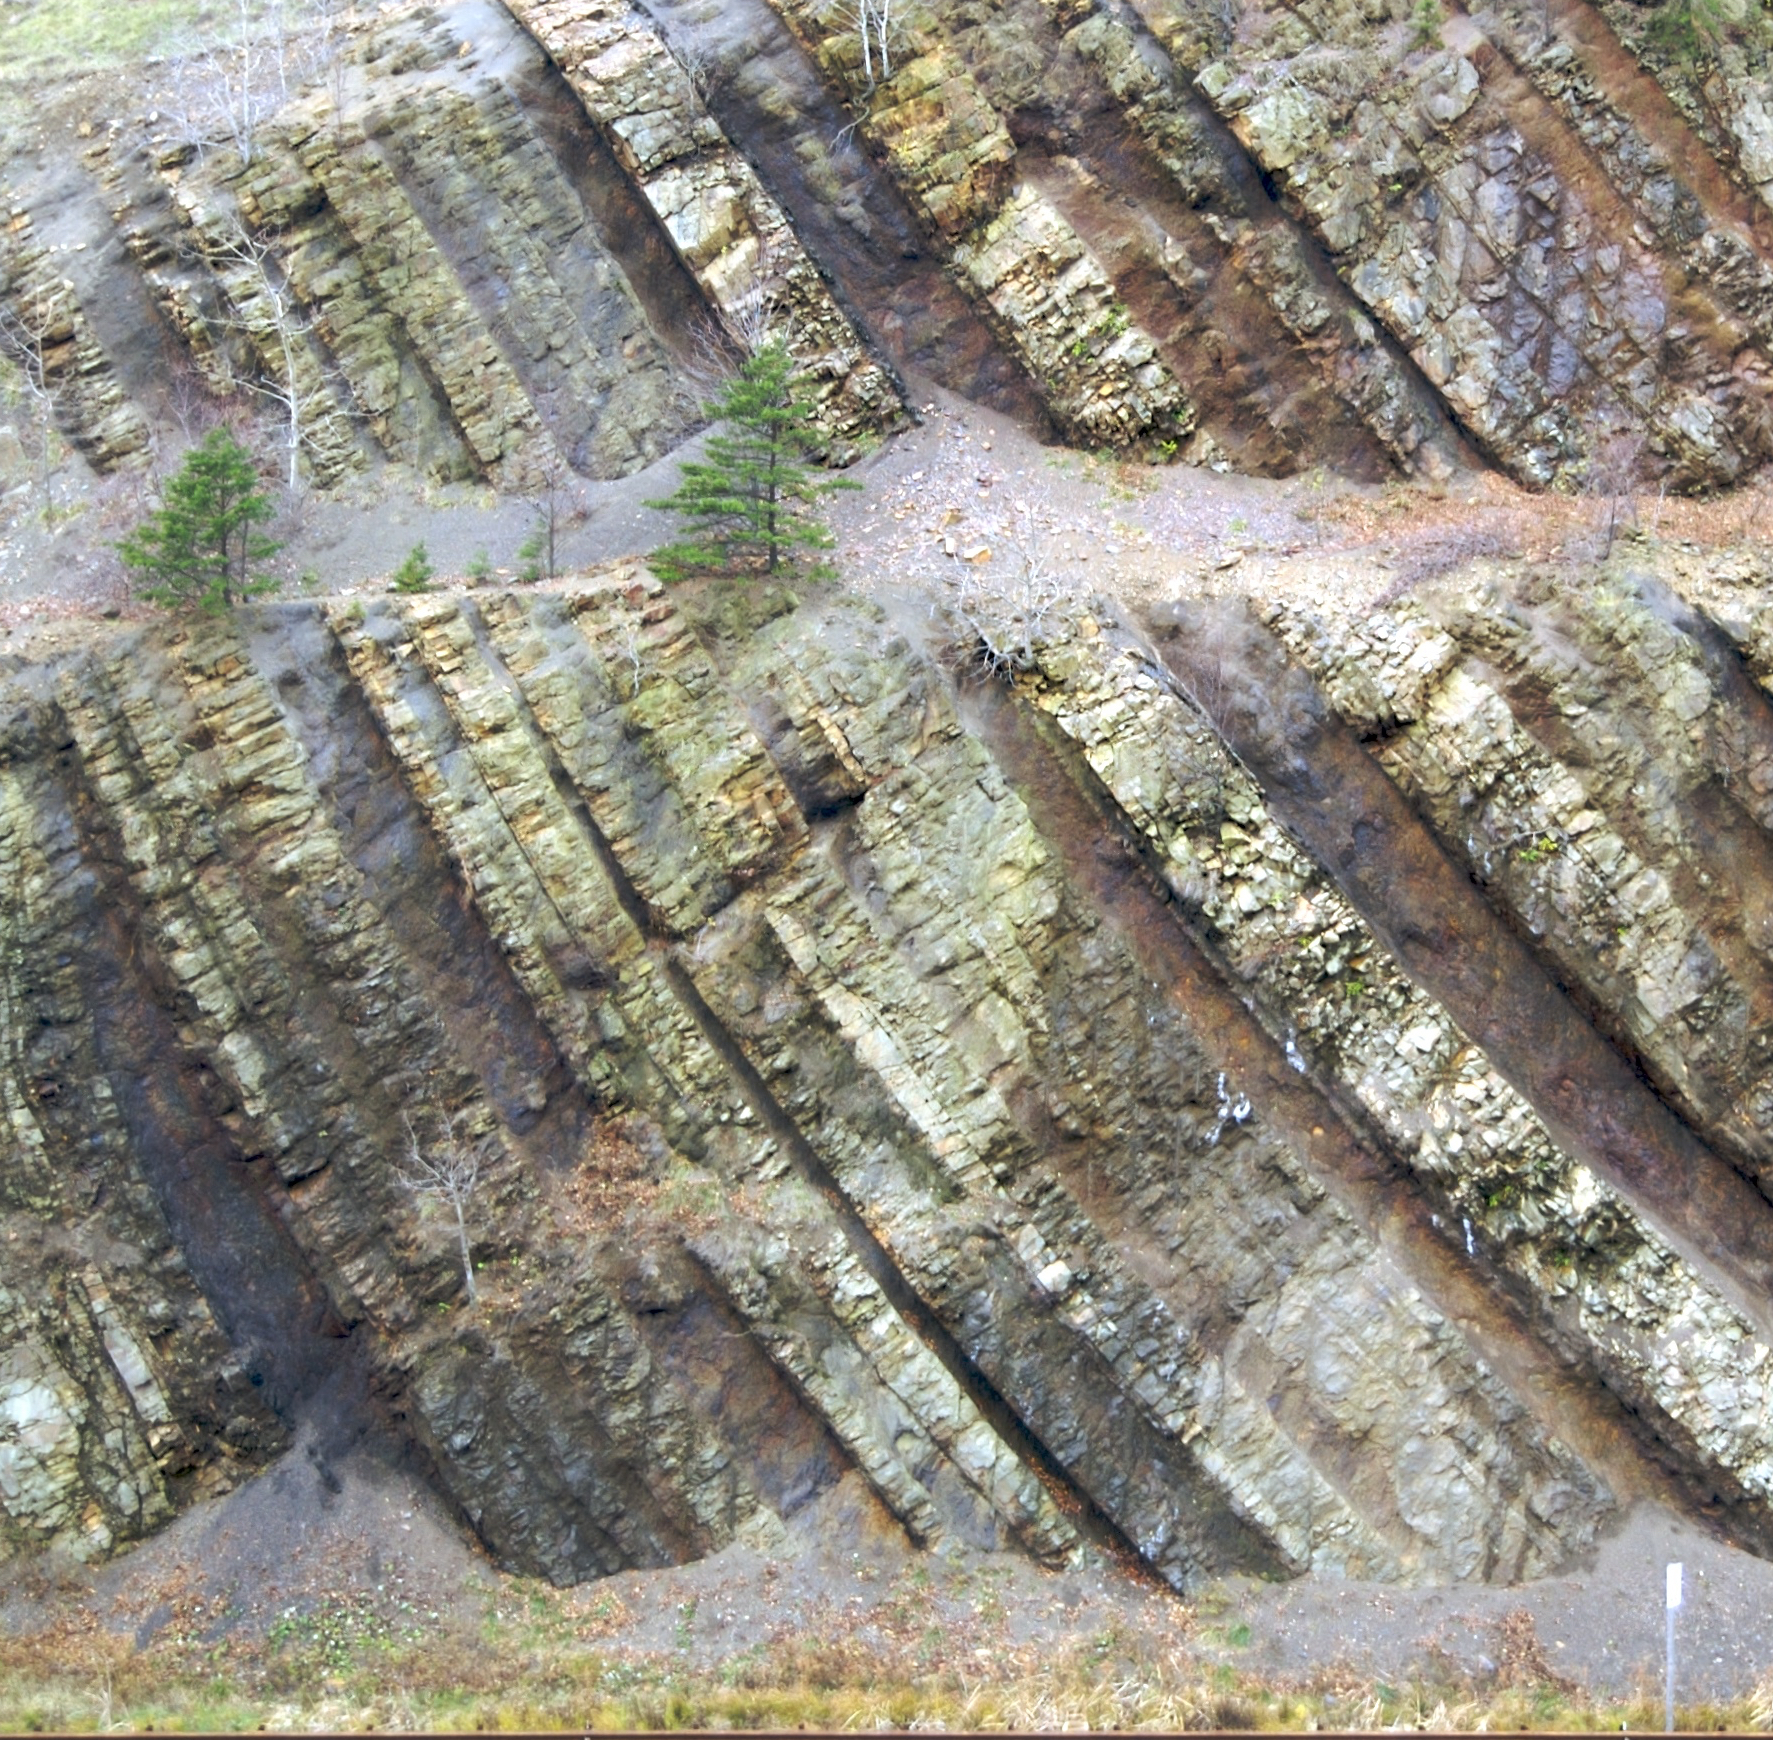 A close up of rock in a roadcut that curves like a U, showing the rock layers. Trees are interspersed in the rock.